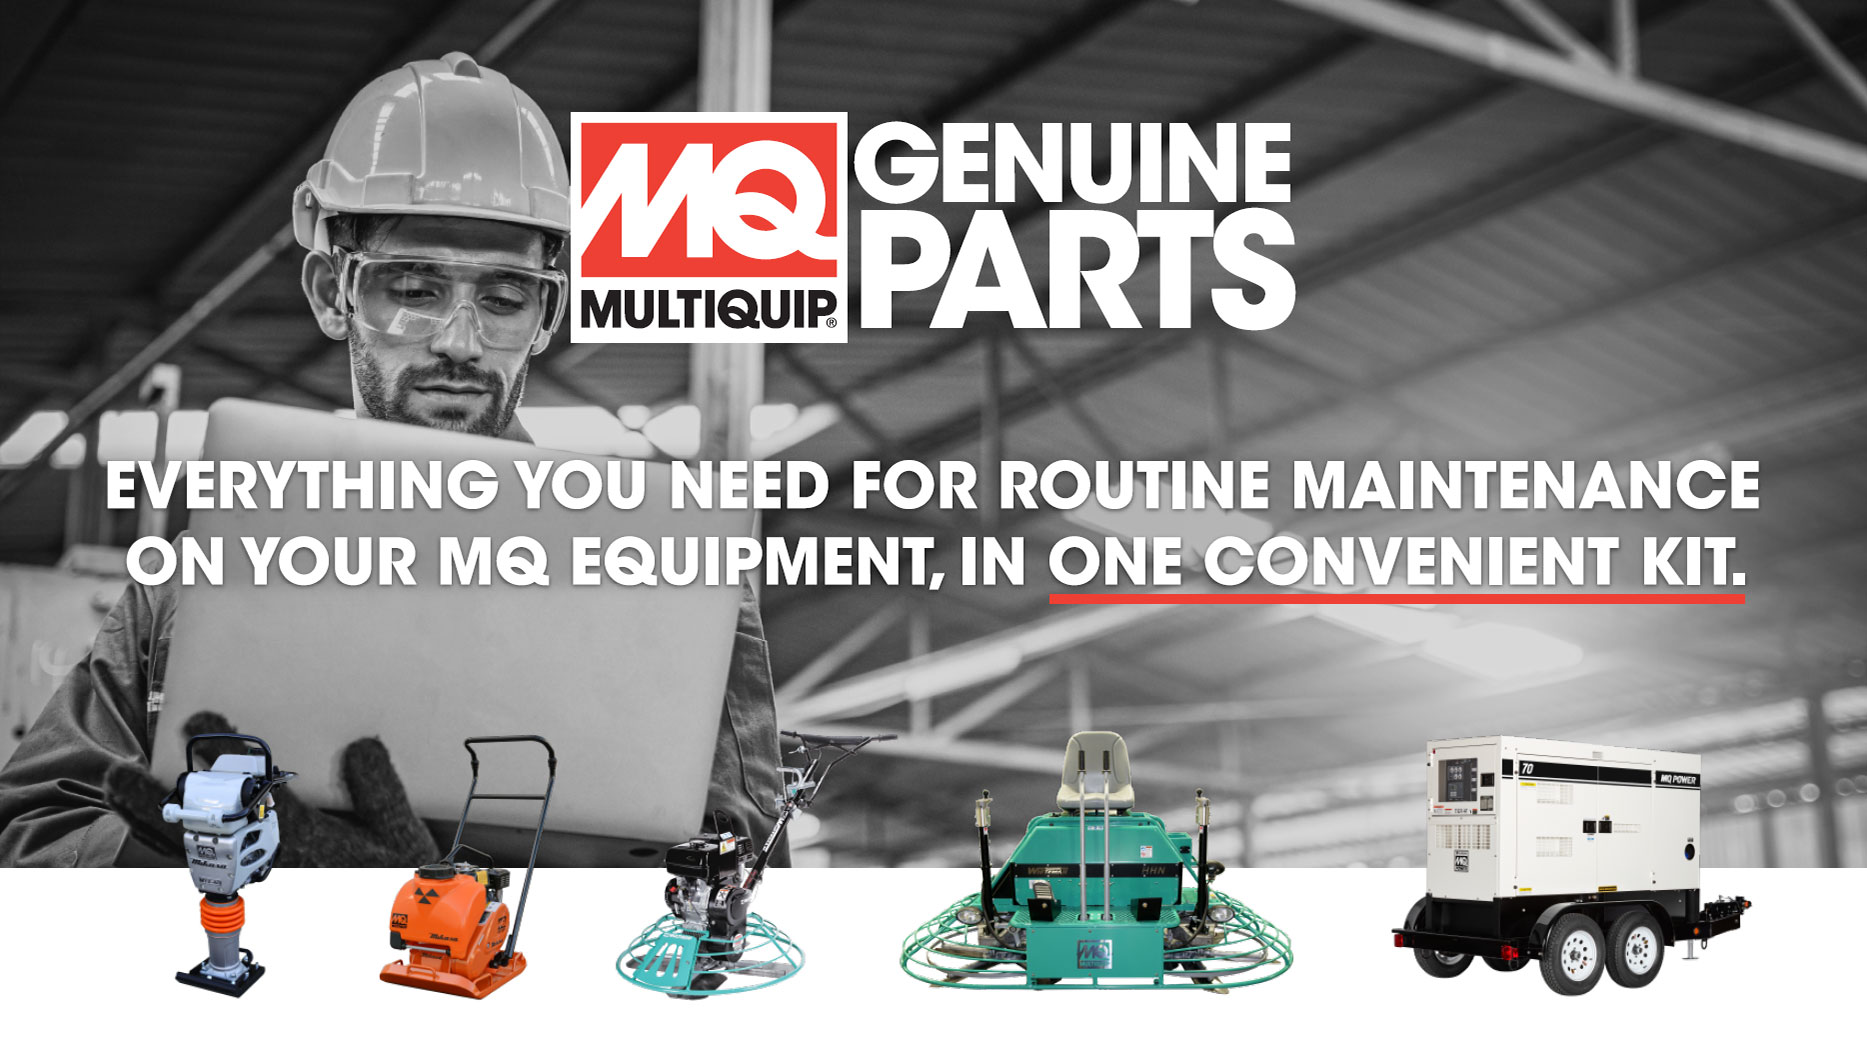 Everything you need for routine MQ equipment maintenance in one convinient kit!